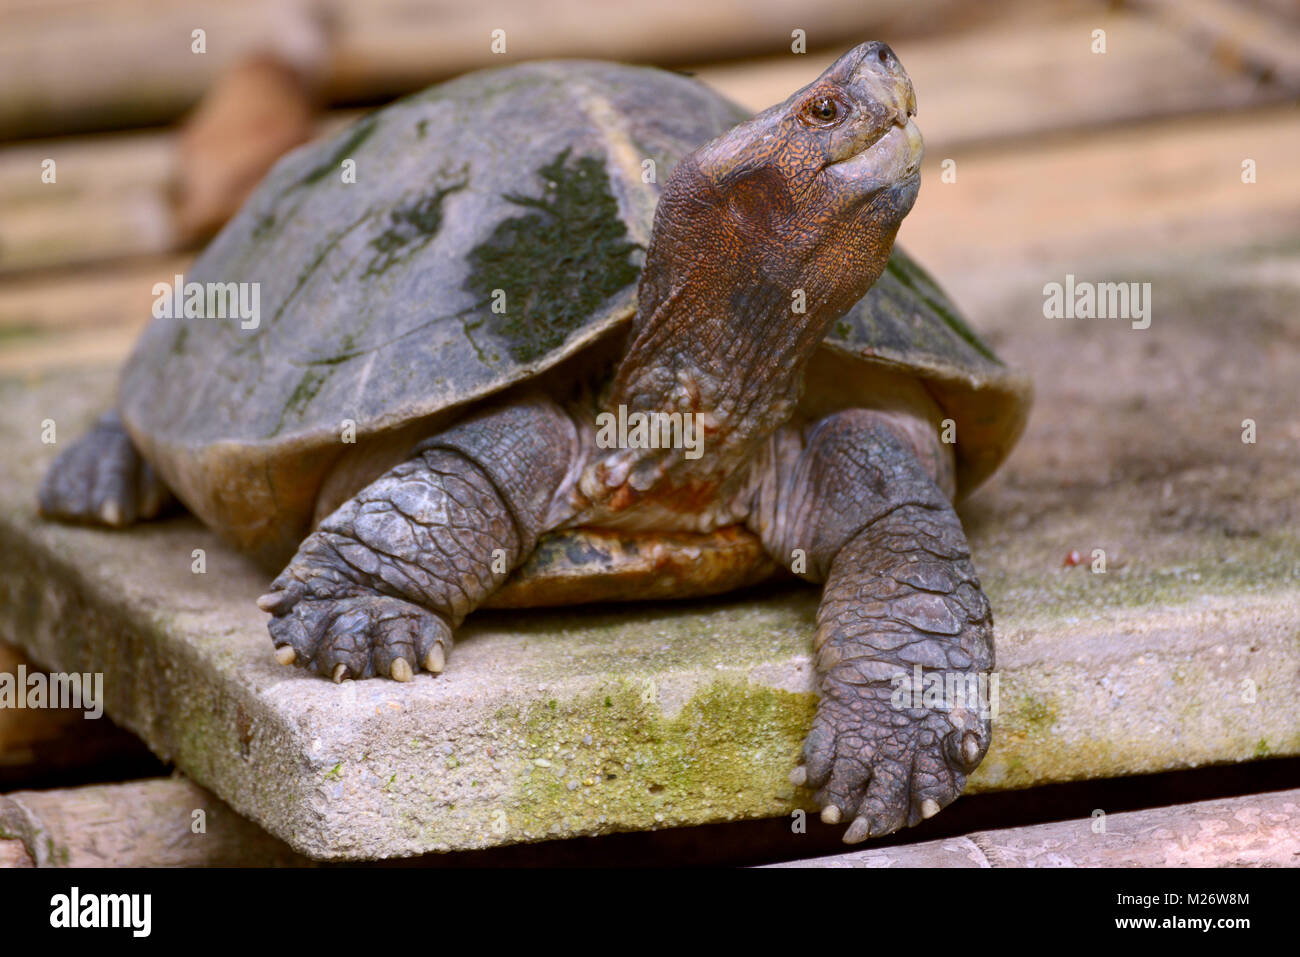 Portrait of a turtle giant asian pond turtle Stock Photo